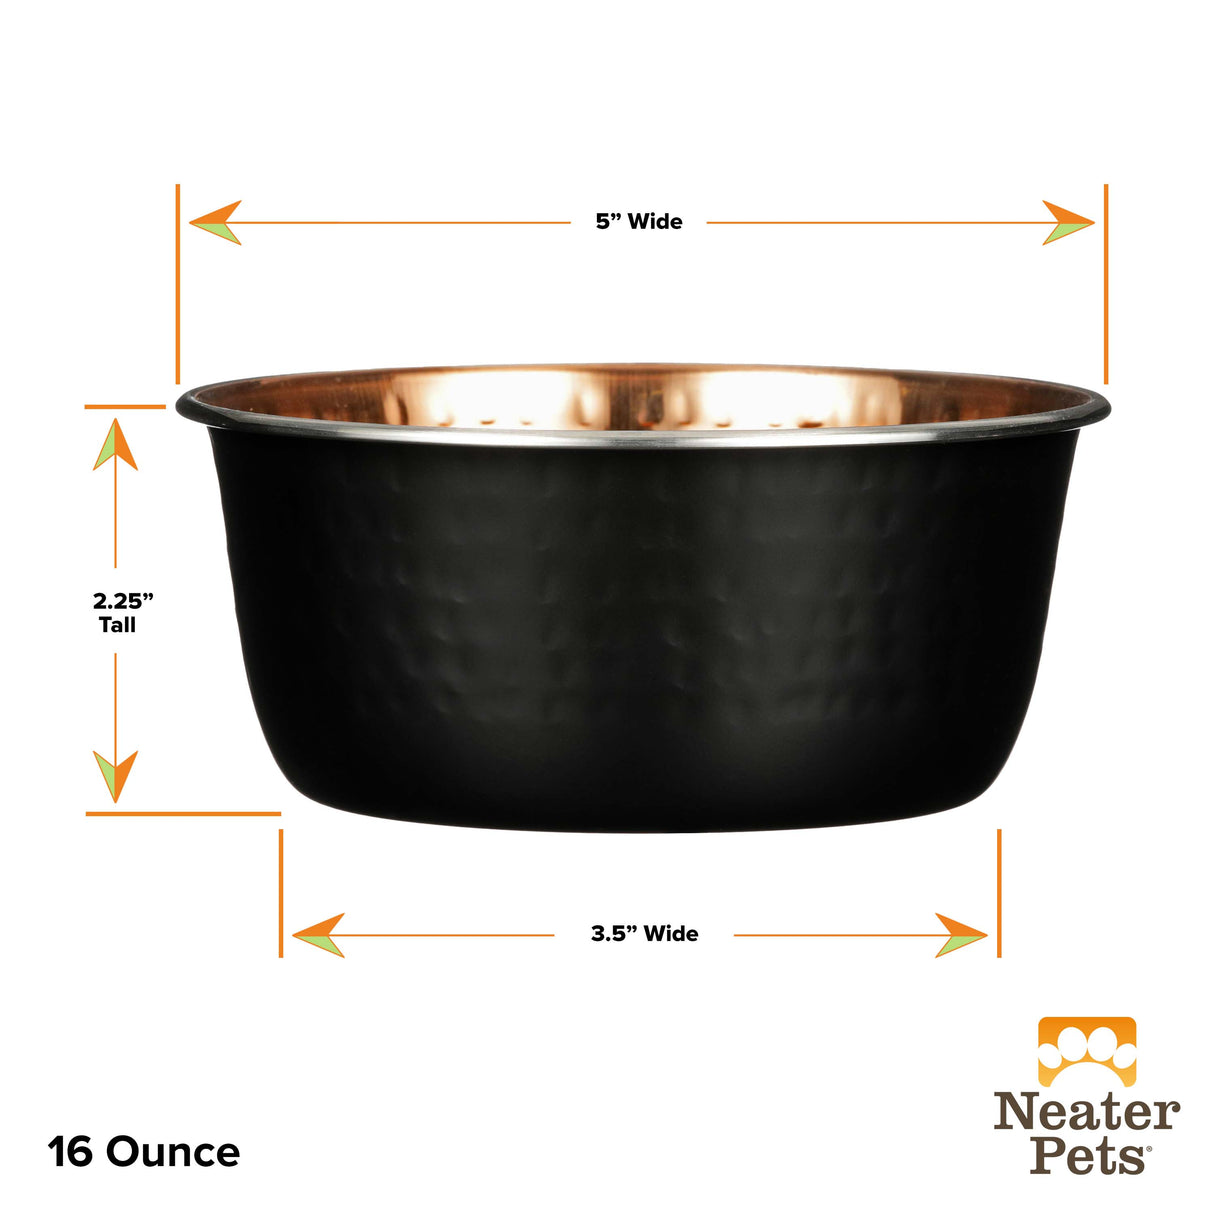 16 ounce sizing guide for Black Hammered Copper Bowl